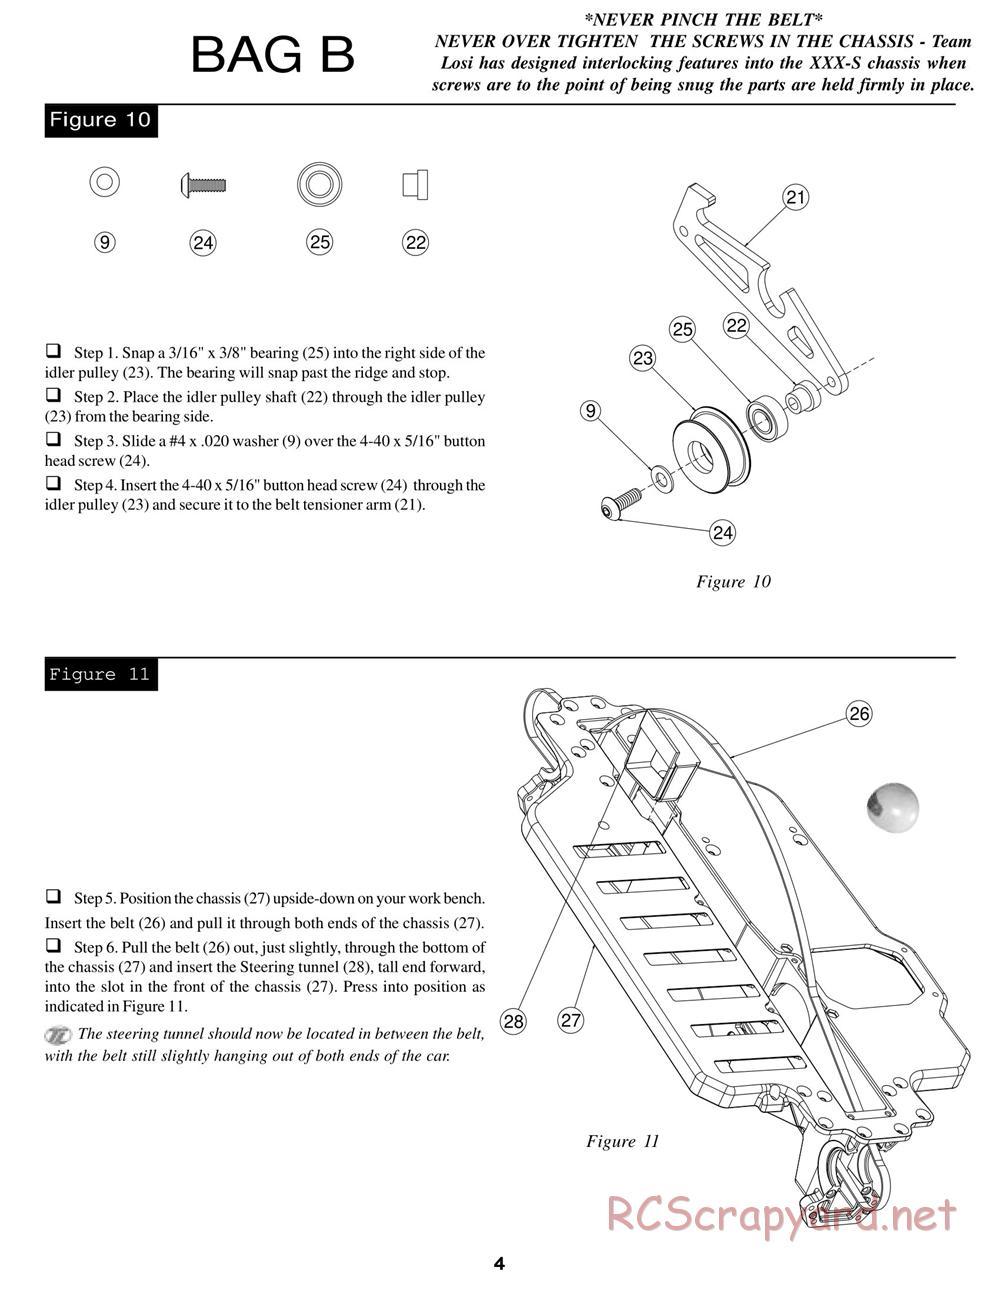 Team Losi - XXX-S - Manual - Page 7